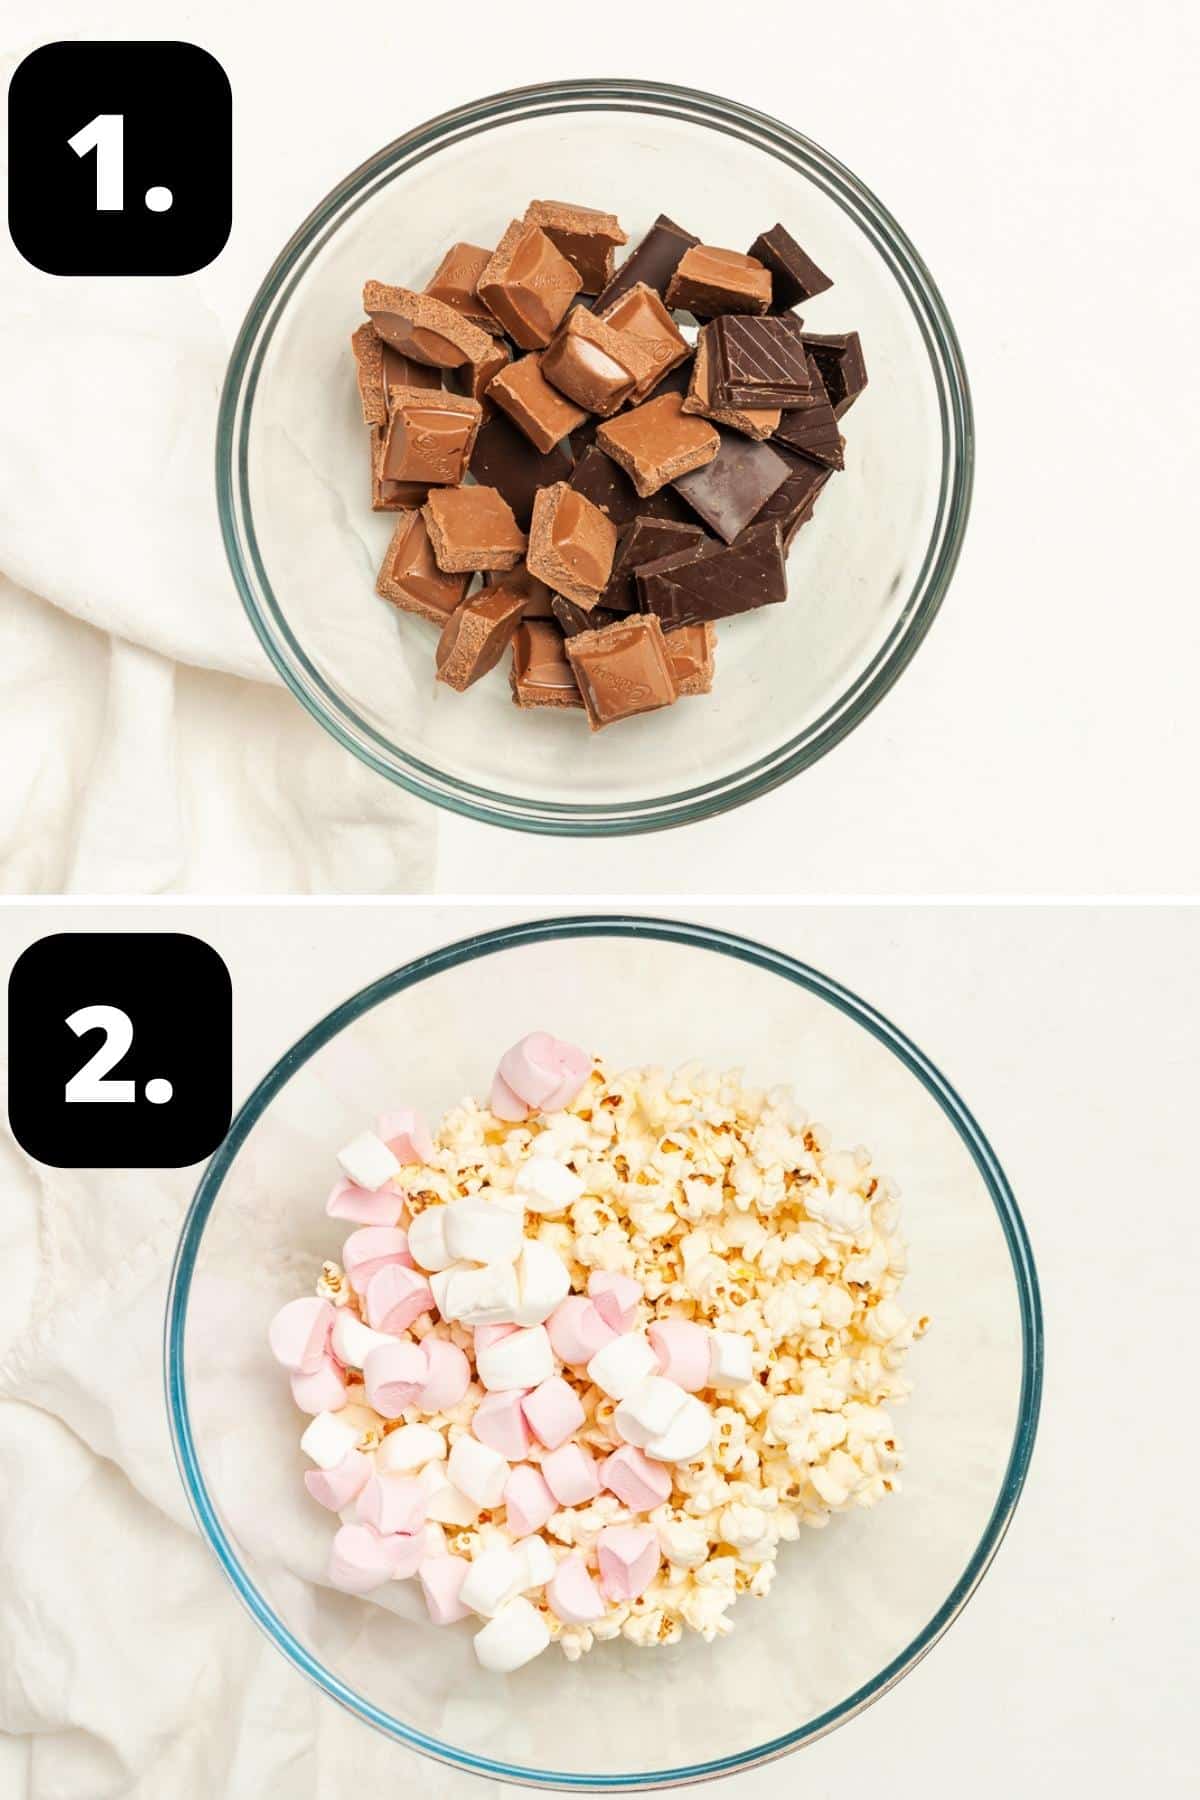 Steps 1-2 of preparing this recipe - chocolate in a bowl ready to be melted and the popcorn and marshmallows in another bowl.